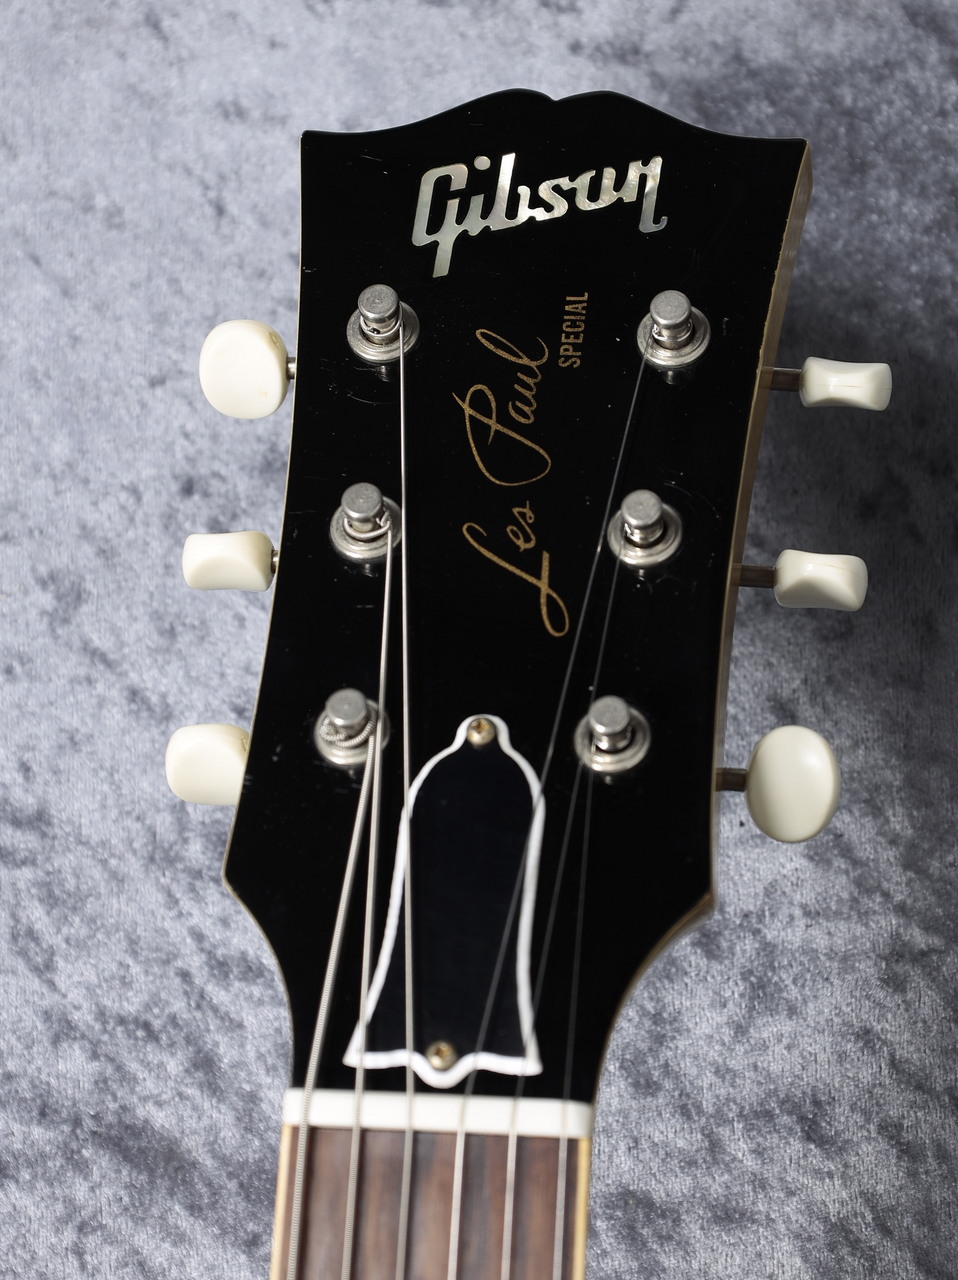 Gibson Custom Shop Historic Collection 1960 Les Paul Special